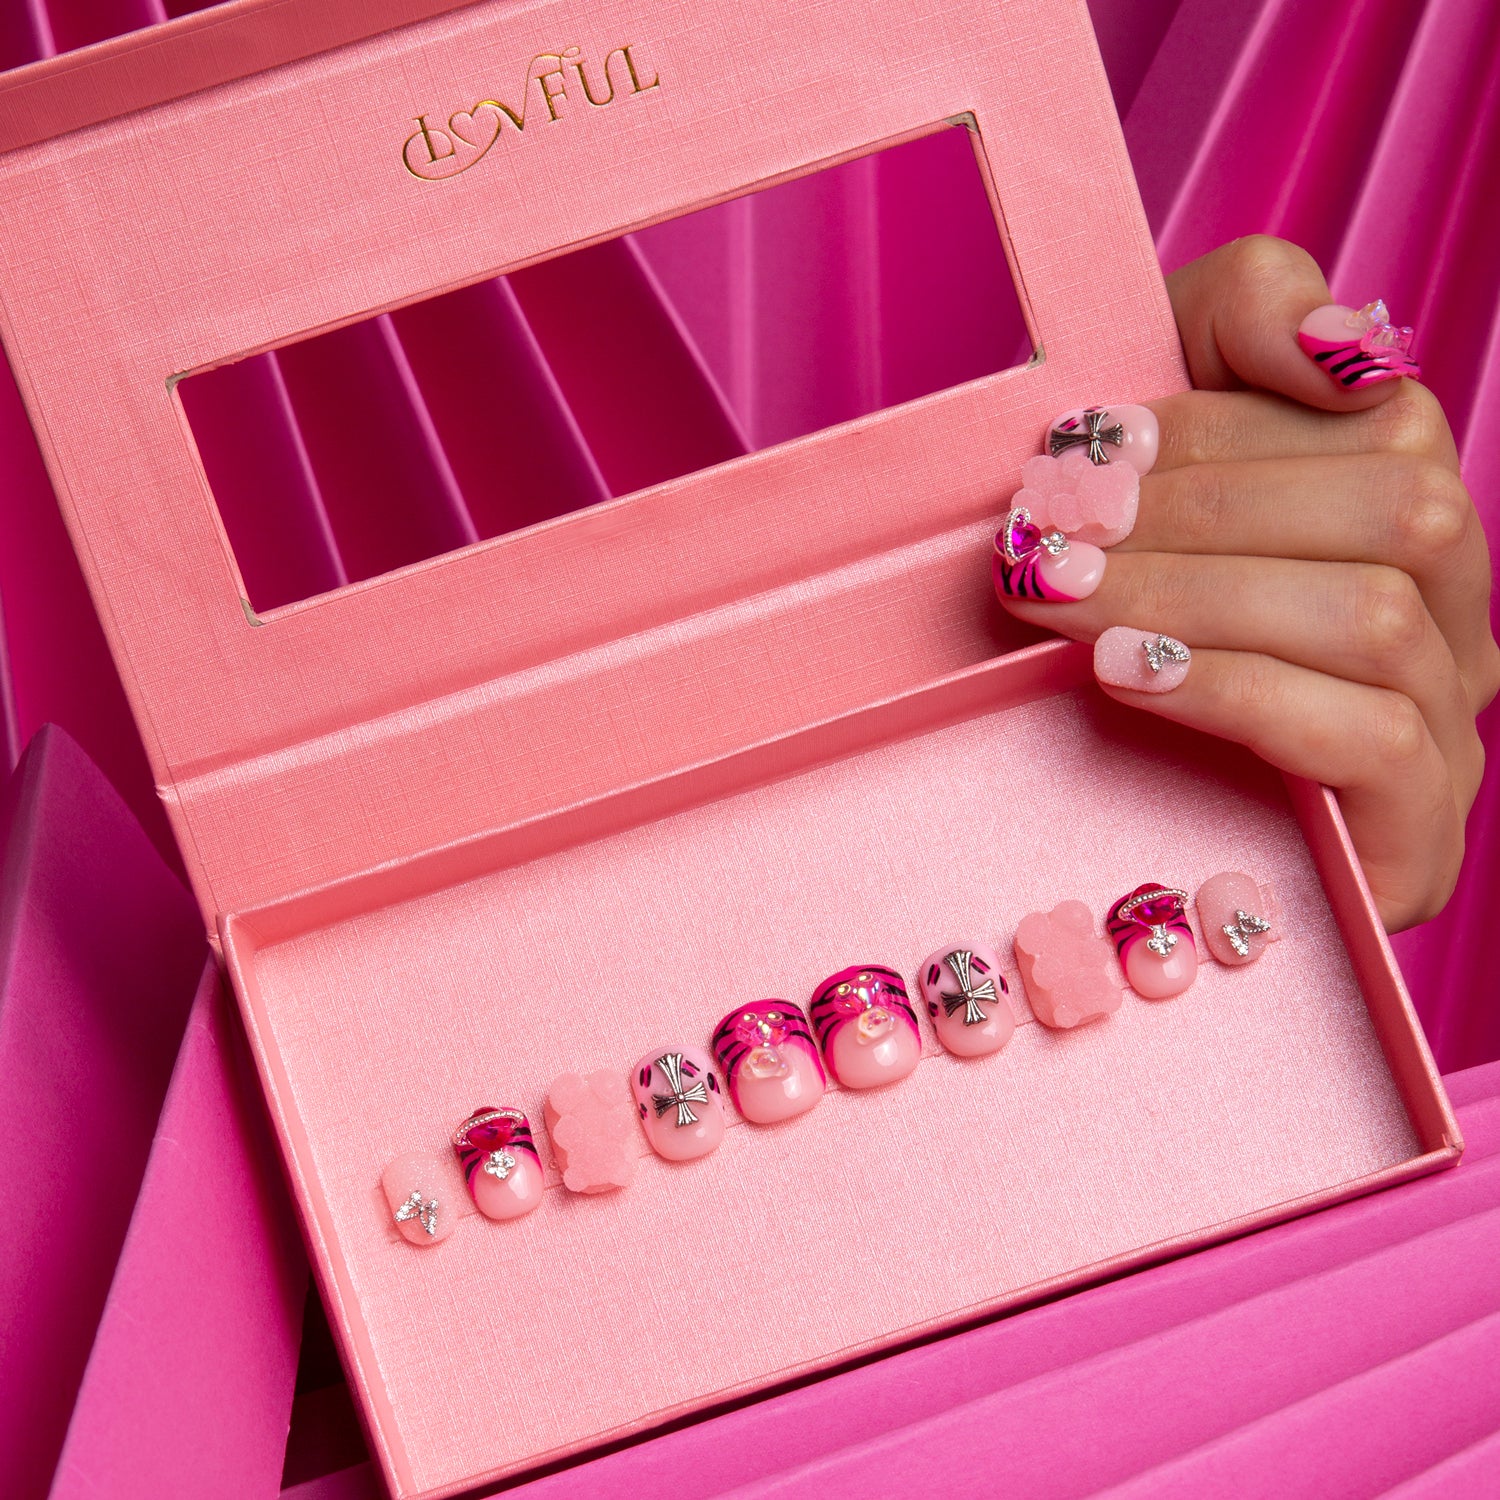 Hot pink French tip press-on nails with leopard prints, lips, and butterflies in a pink Lovful box with mirror